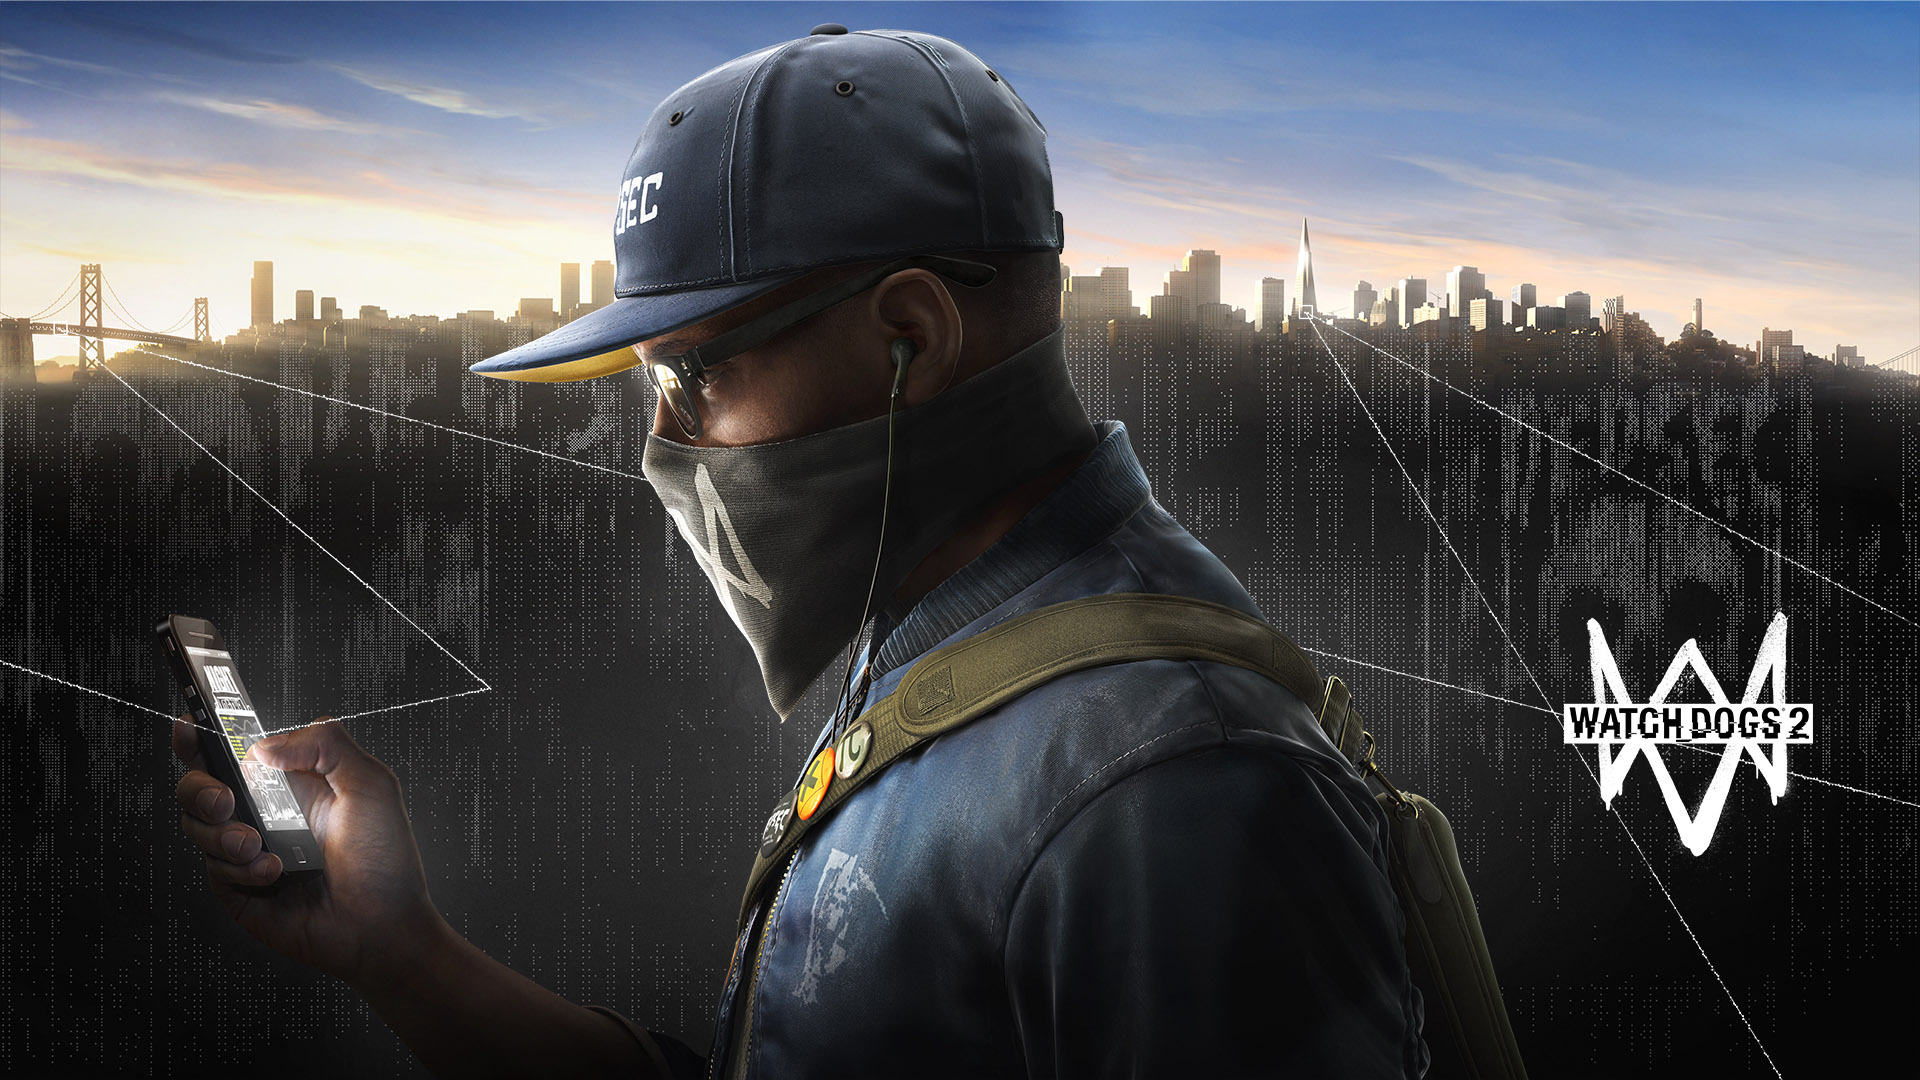 Watch Dogs Wallpaper High Quality